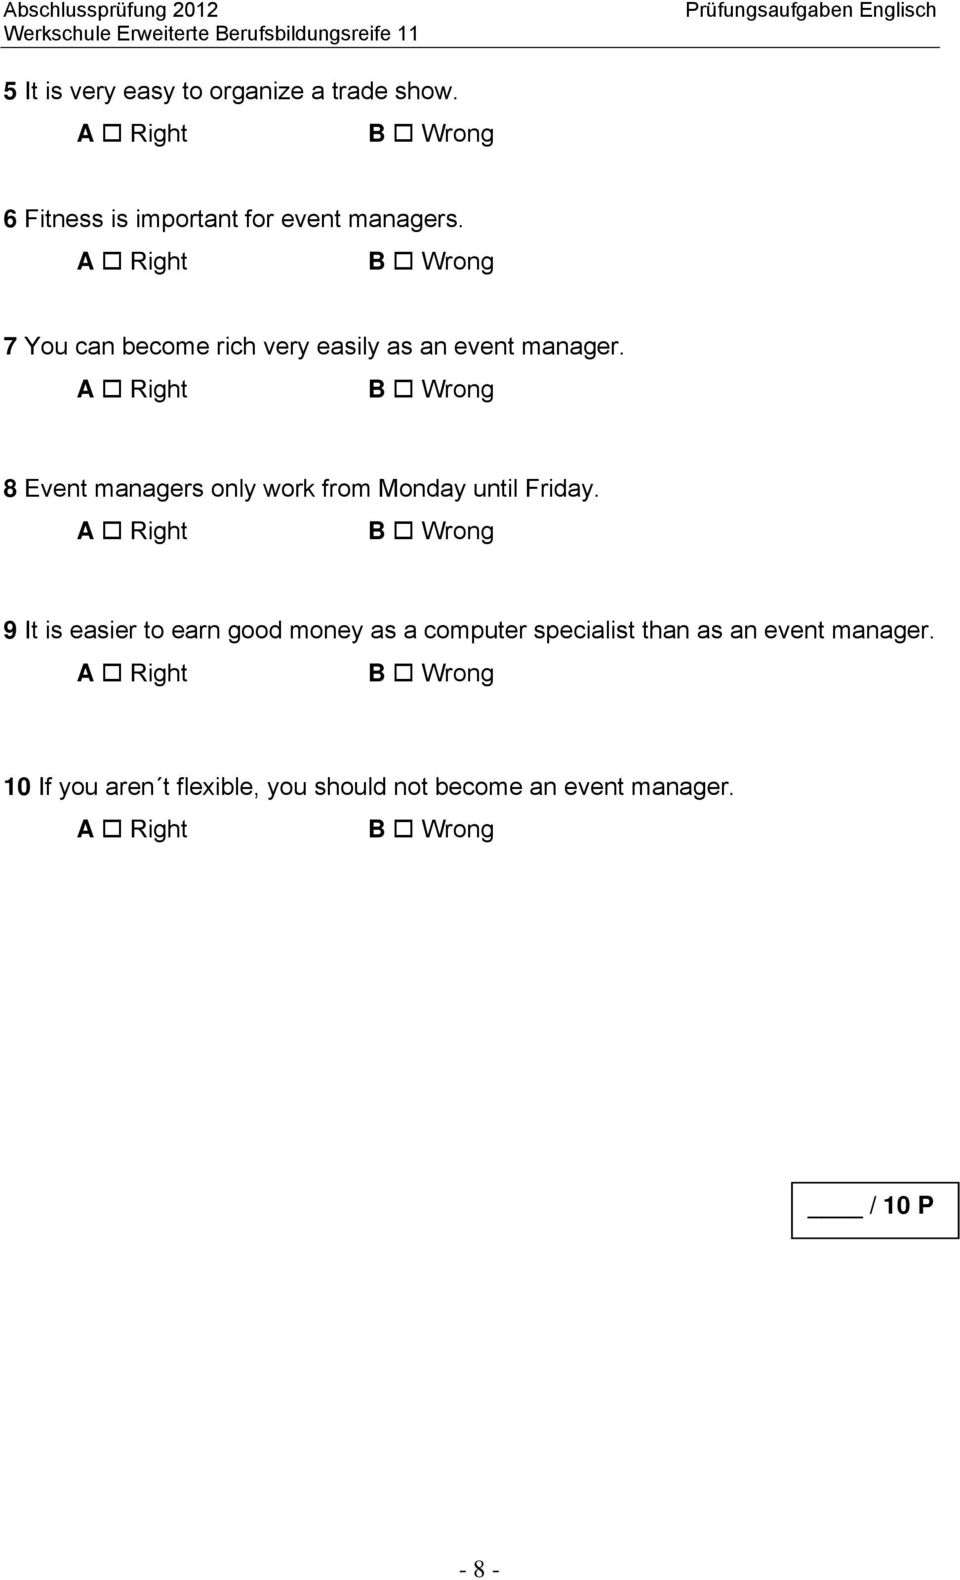 8 Event managers only work from Monday until Friday.